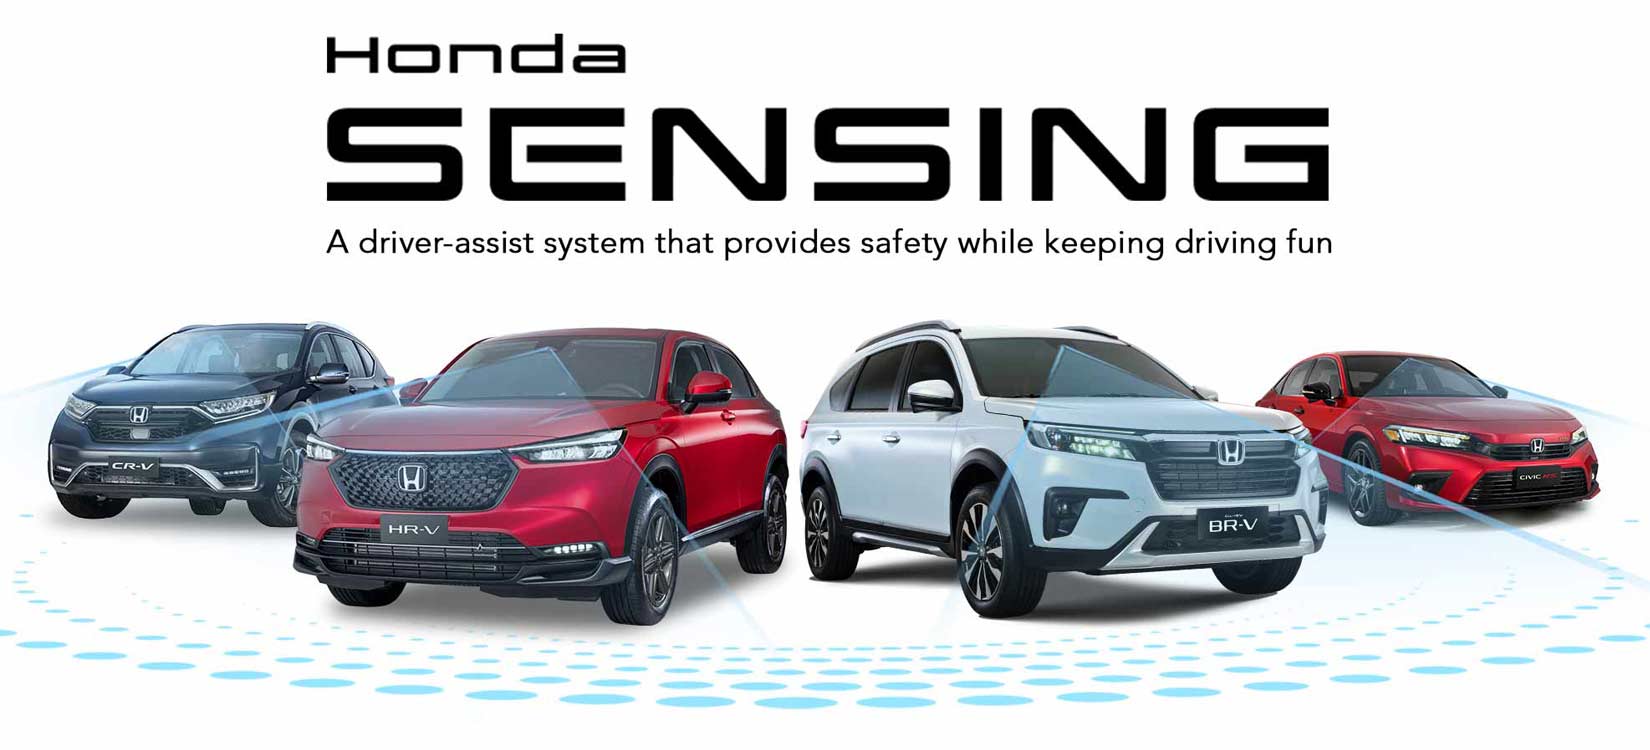 Honda SENSING helps you get by holiday traffic safely and more conveniently